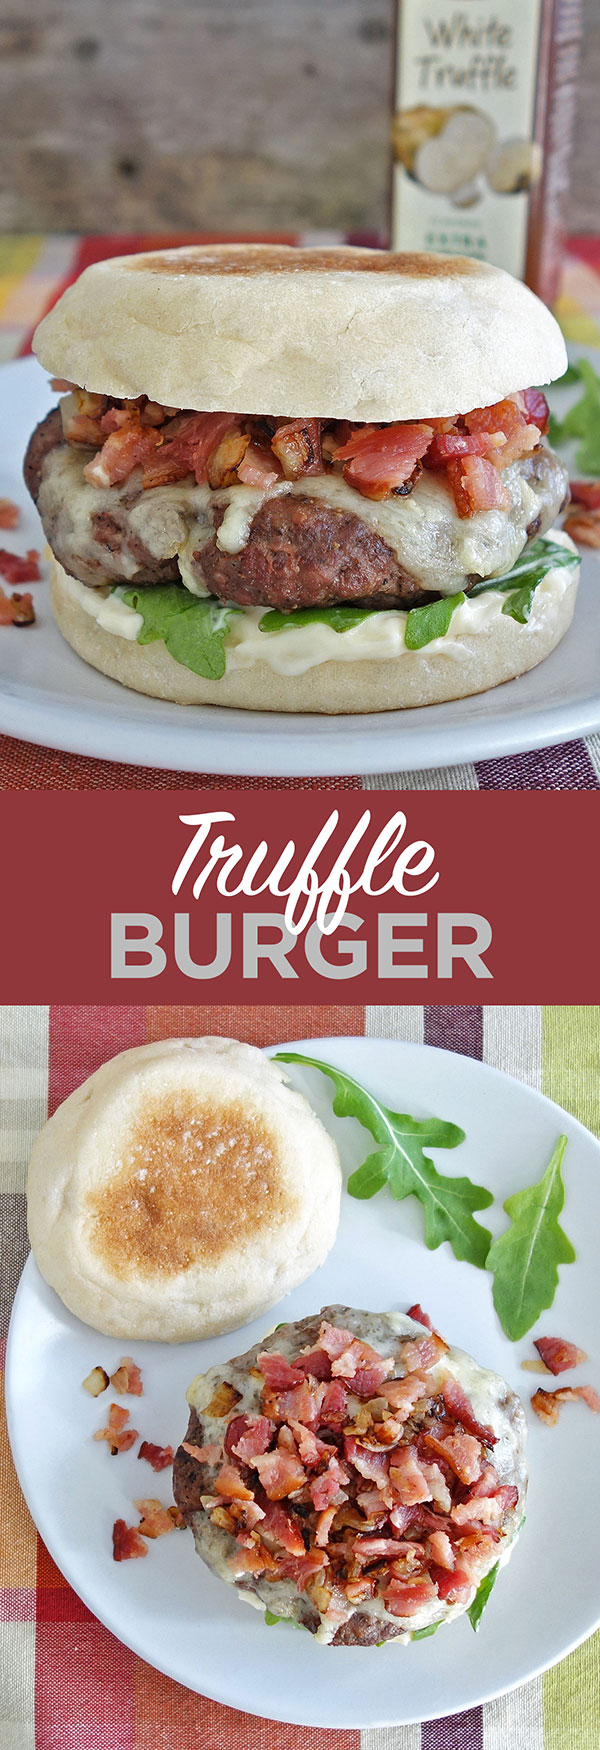 The truffle burger features the delicious flavor of truffle aioli and then is topped off with some diced bacon and onion.